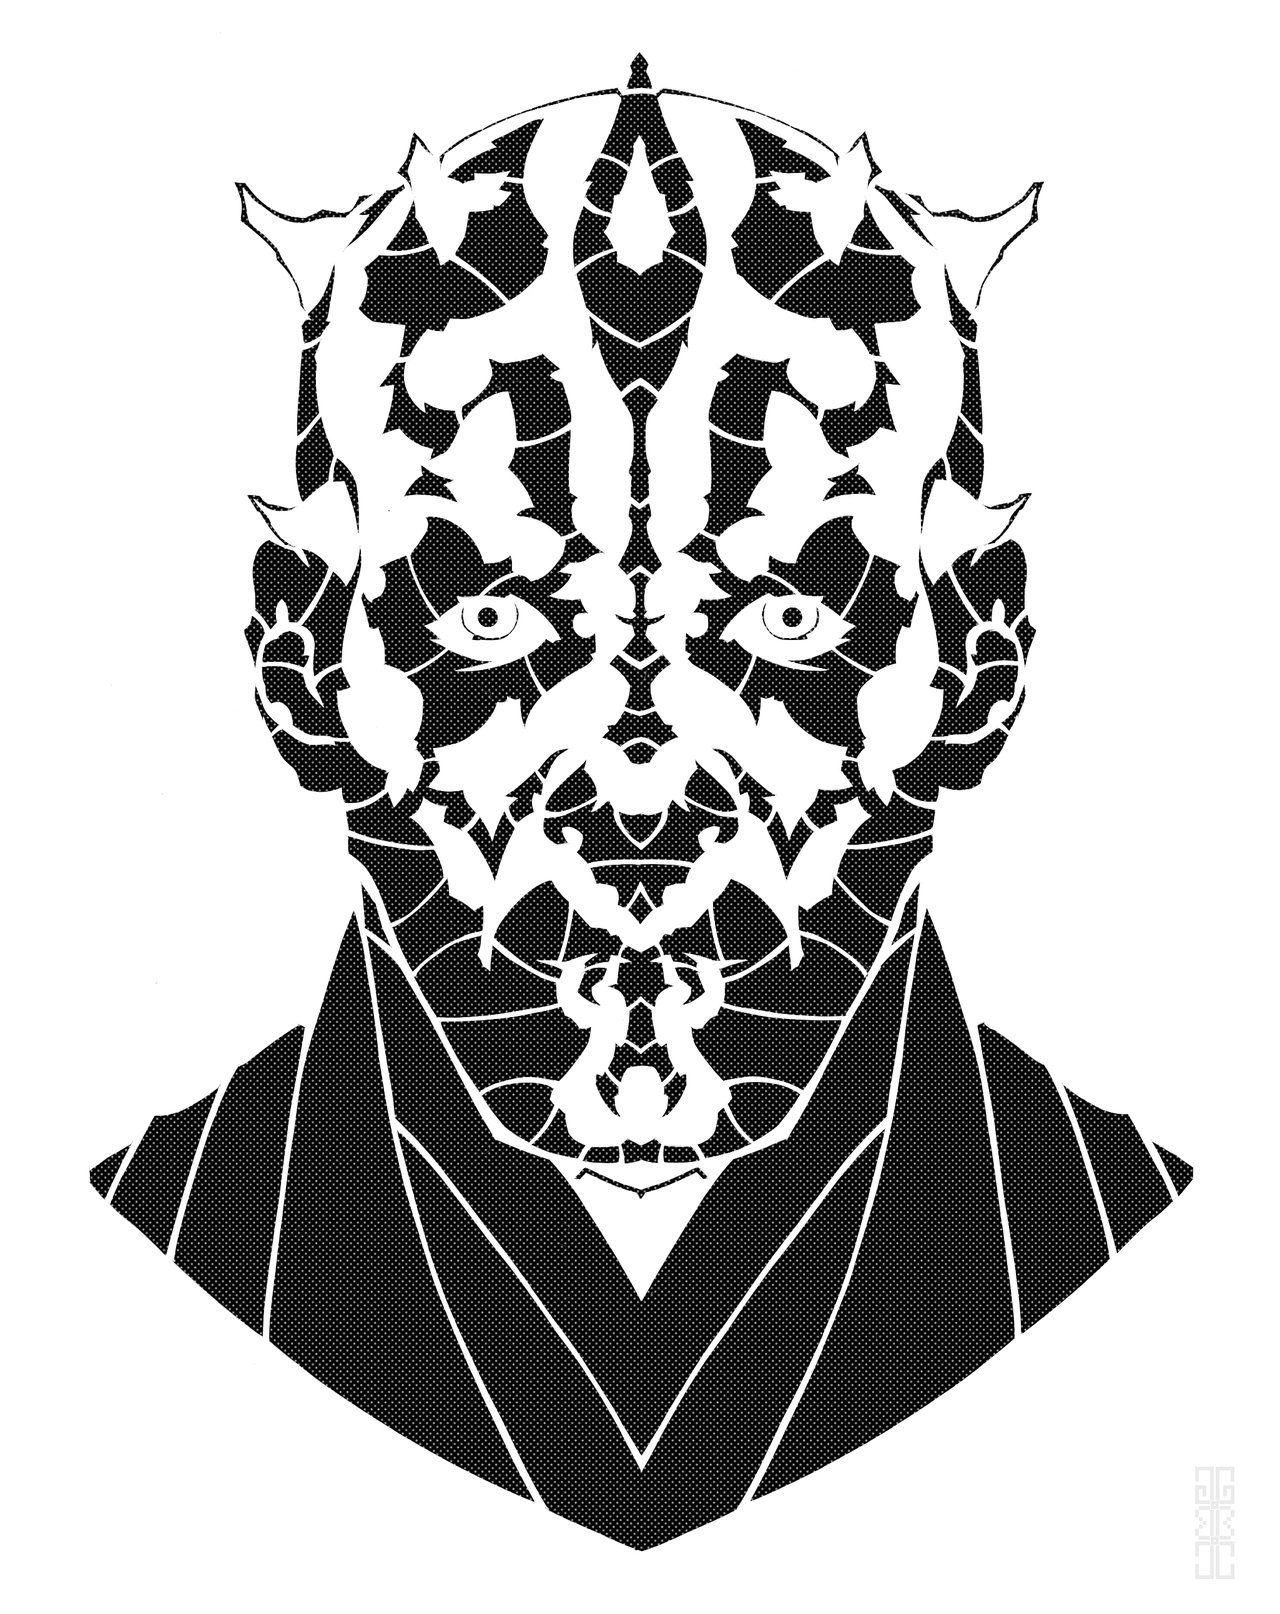 Clip Arts Related To : star wars darth maul clipart. 